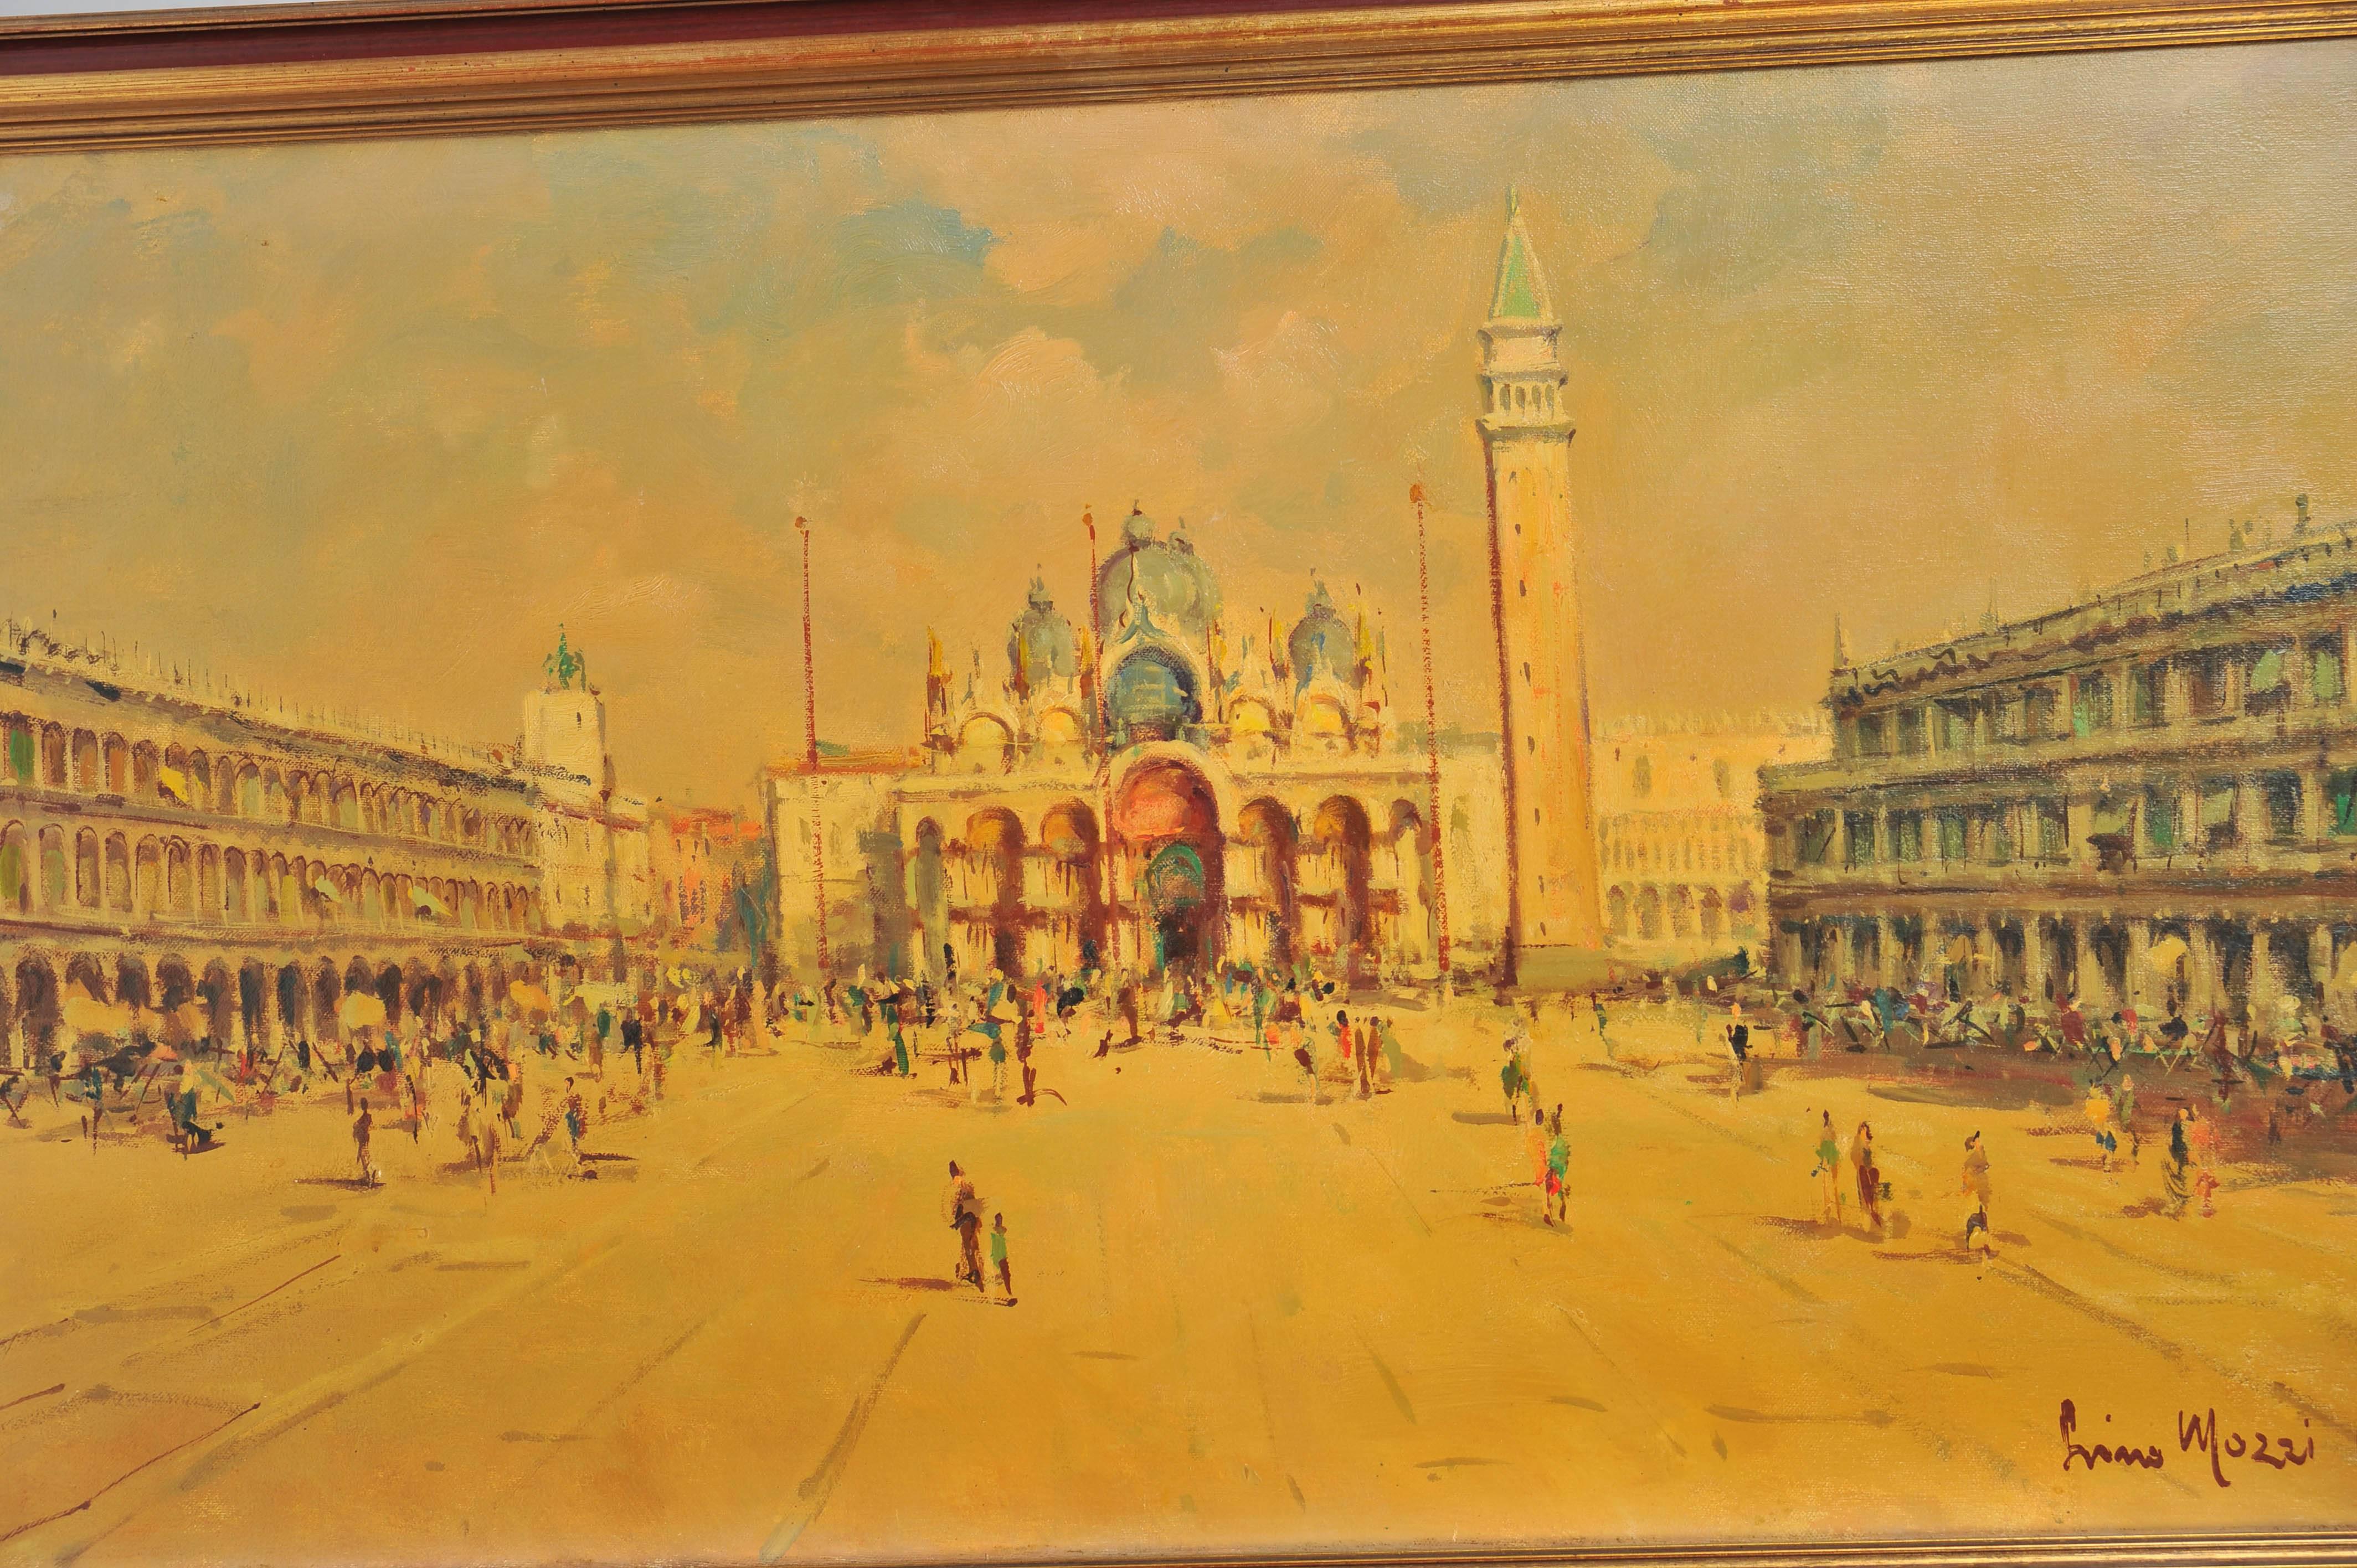 Oil on canvas of San Marco Square, Venice signed Lino Mozzi, 1971 
Framed. 
The image depicts the famous Venetian square at sunset showing a warm yellow and blue sky.